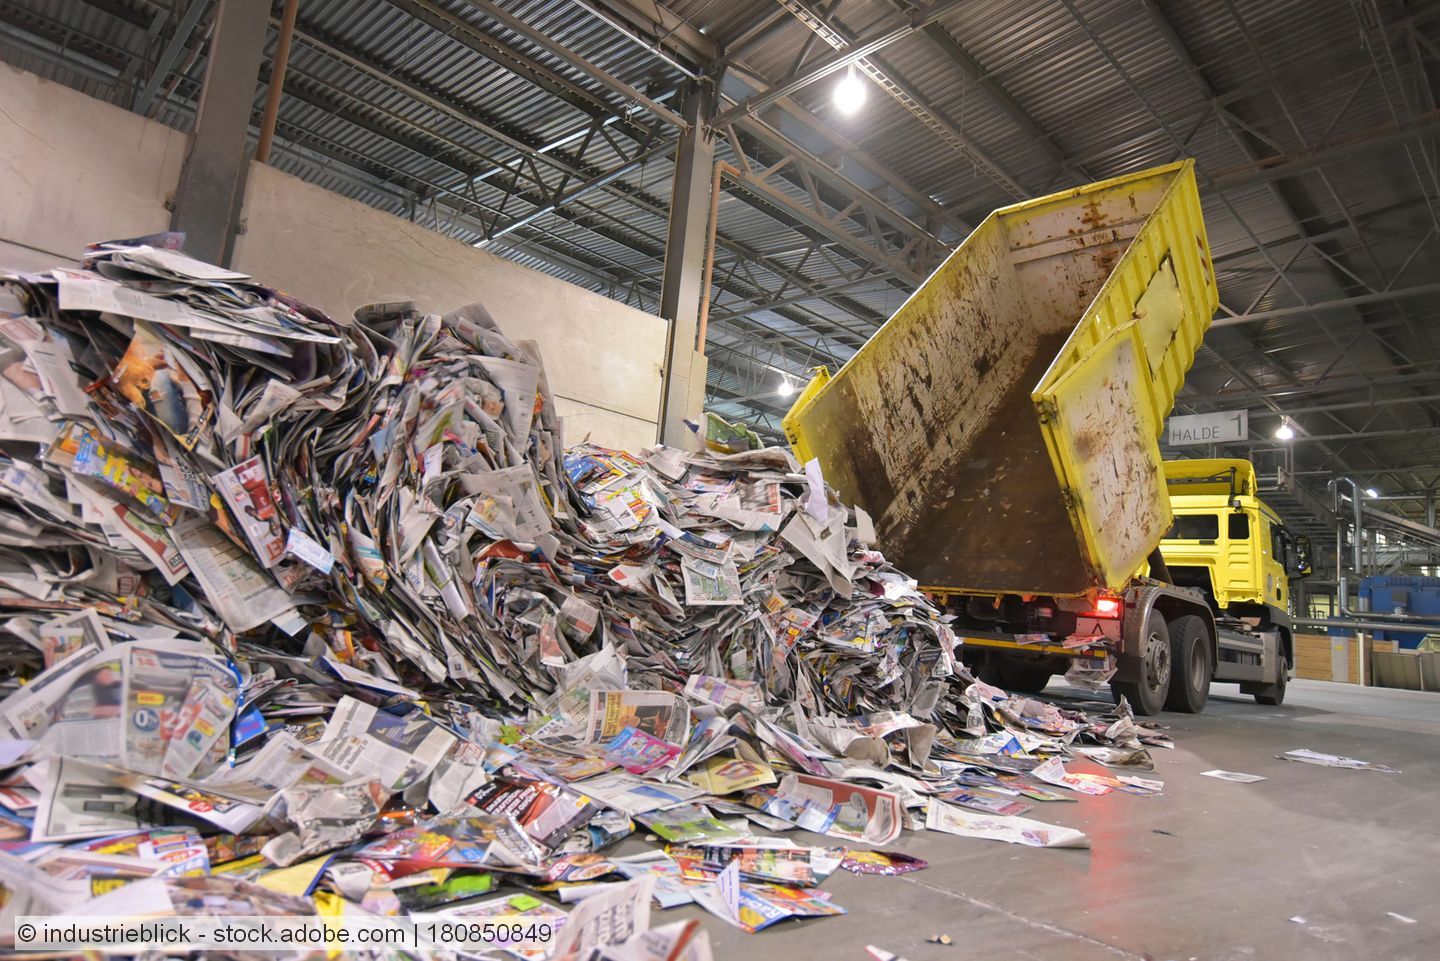 Truck unloads large pile of old newspapers and magazines in warehouse